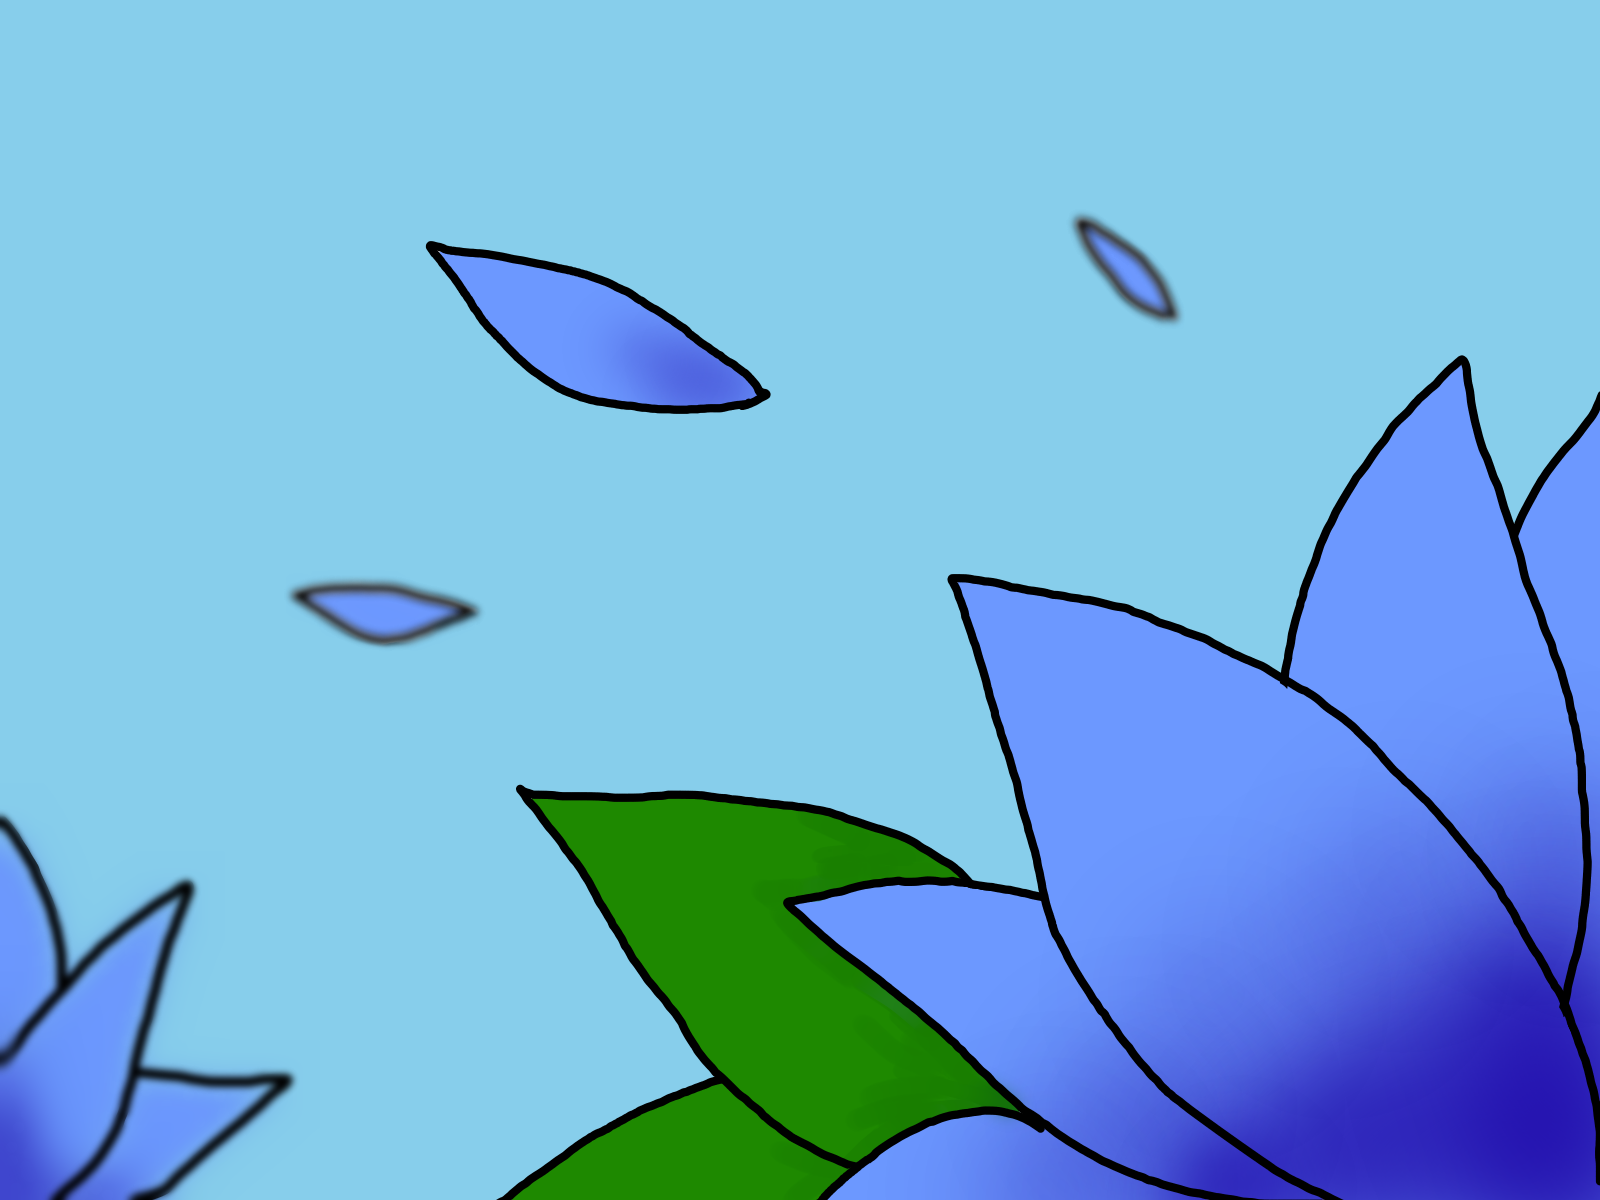 A picture of some blue flowers.